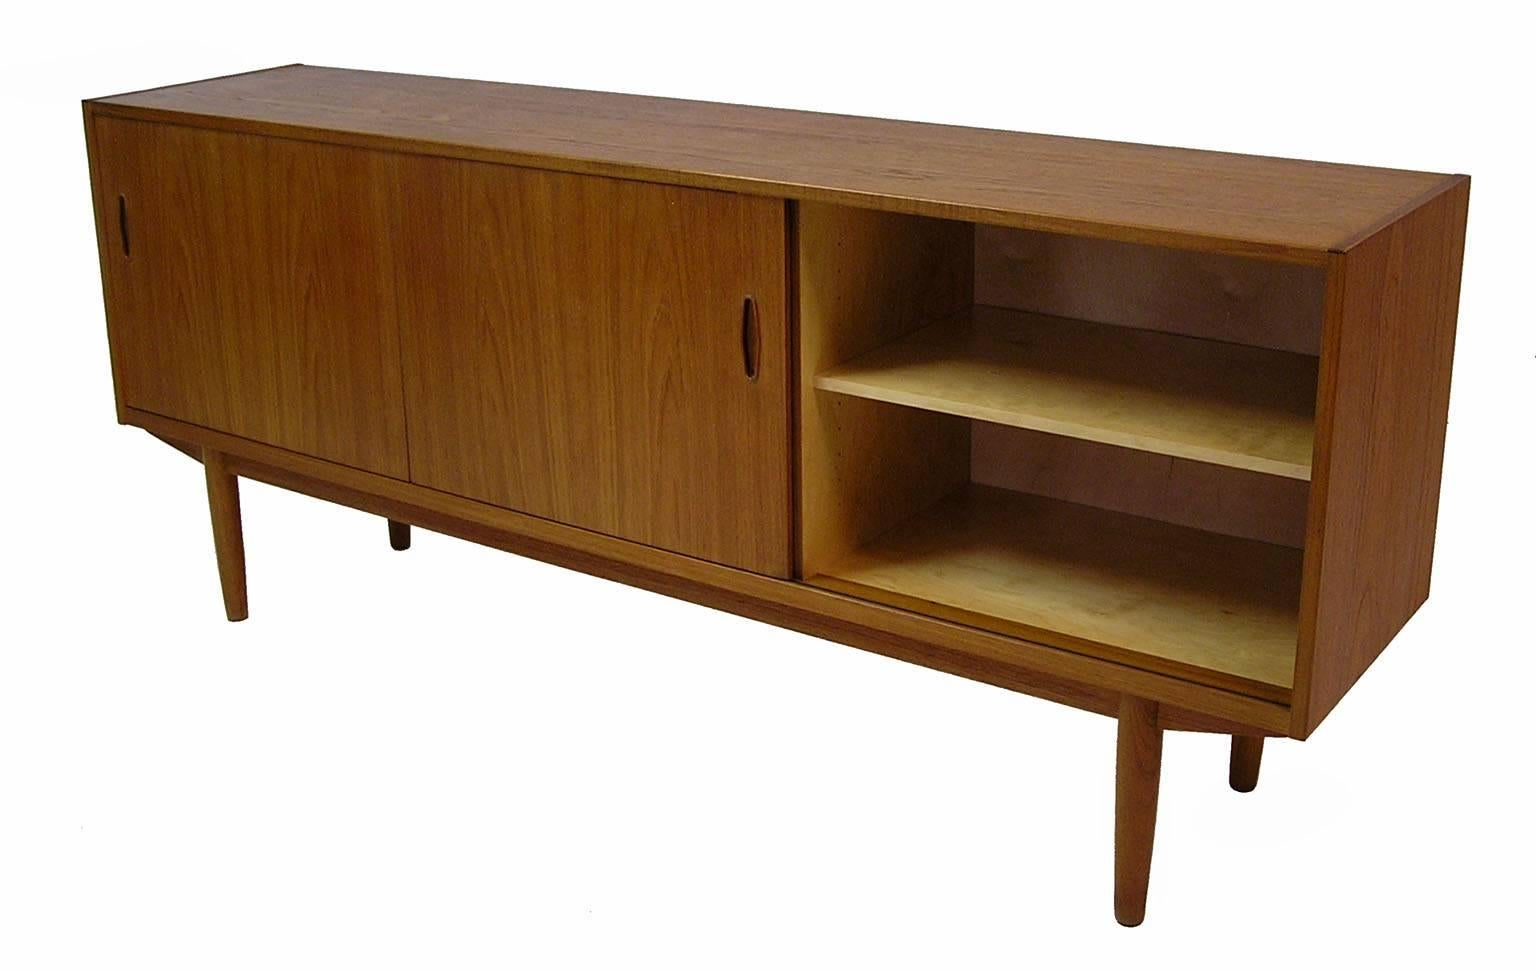 A gorgeous teak sideboard from the 1960s by Nils Jonsson for Troeds of Sweden. Well crafted with plenty of storage and Modern era charm. Great for use as an entertainment unit as well as for adding storage in the dining room, bedroom or office.